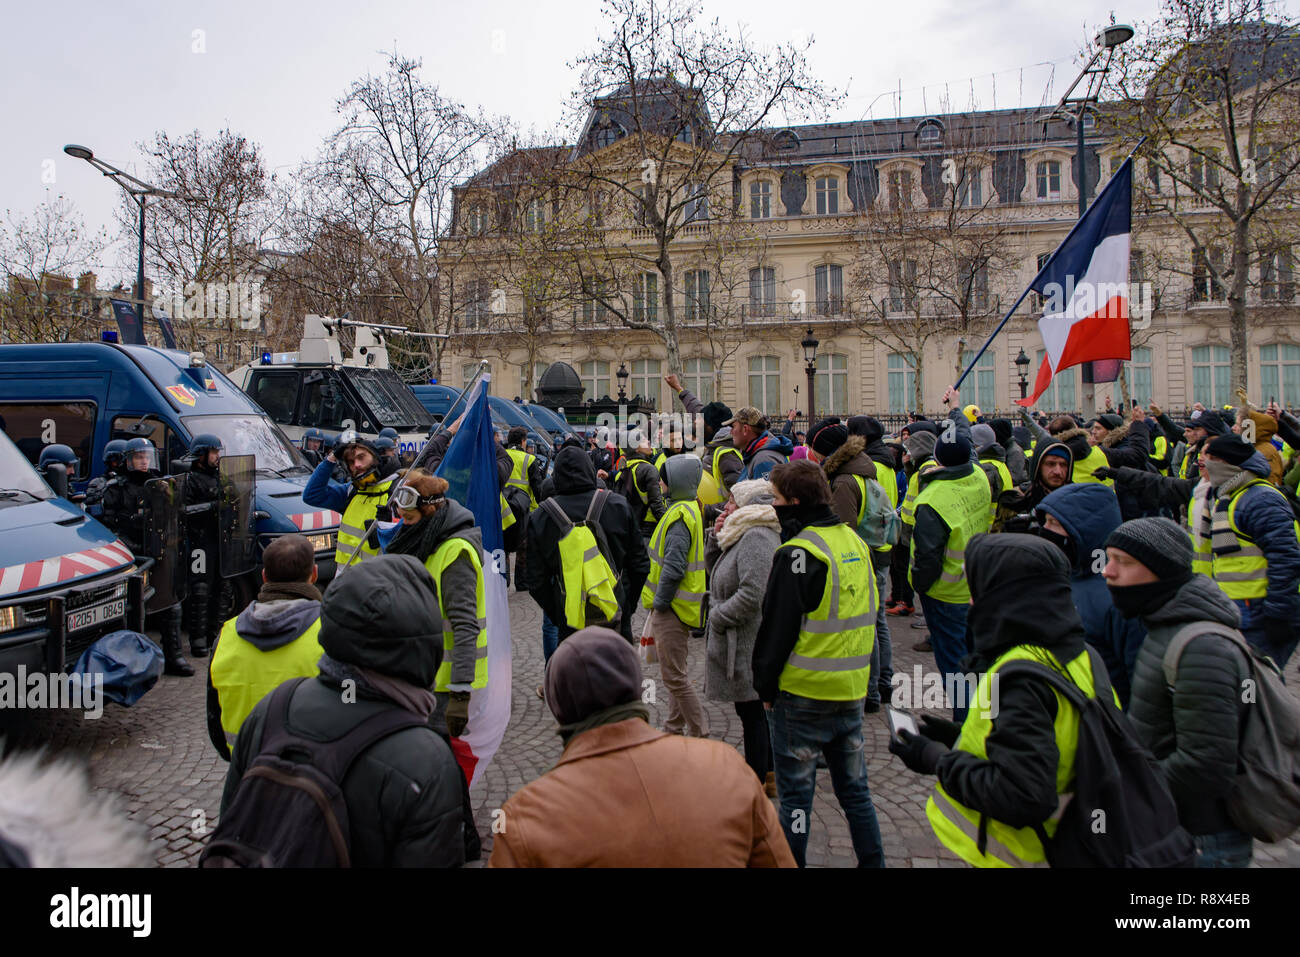 Riot police and Yellow Vests demonstration (Gilets Jaunes) protesters against government and French President Macron at Champs-Élysées, Paris, France Stock Photo